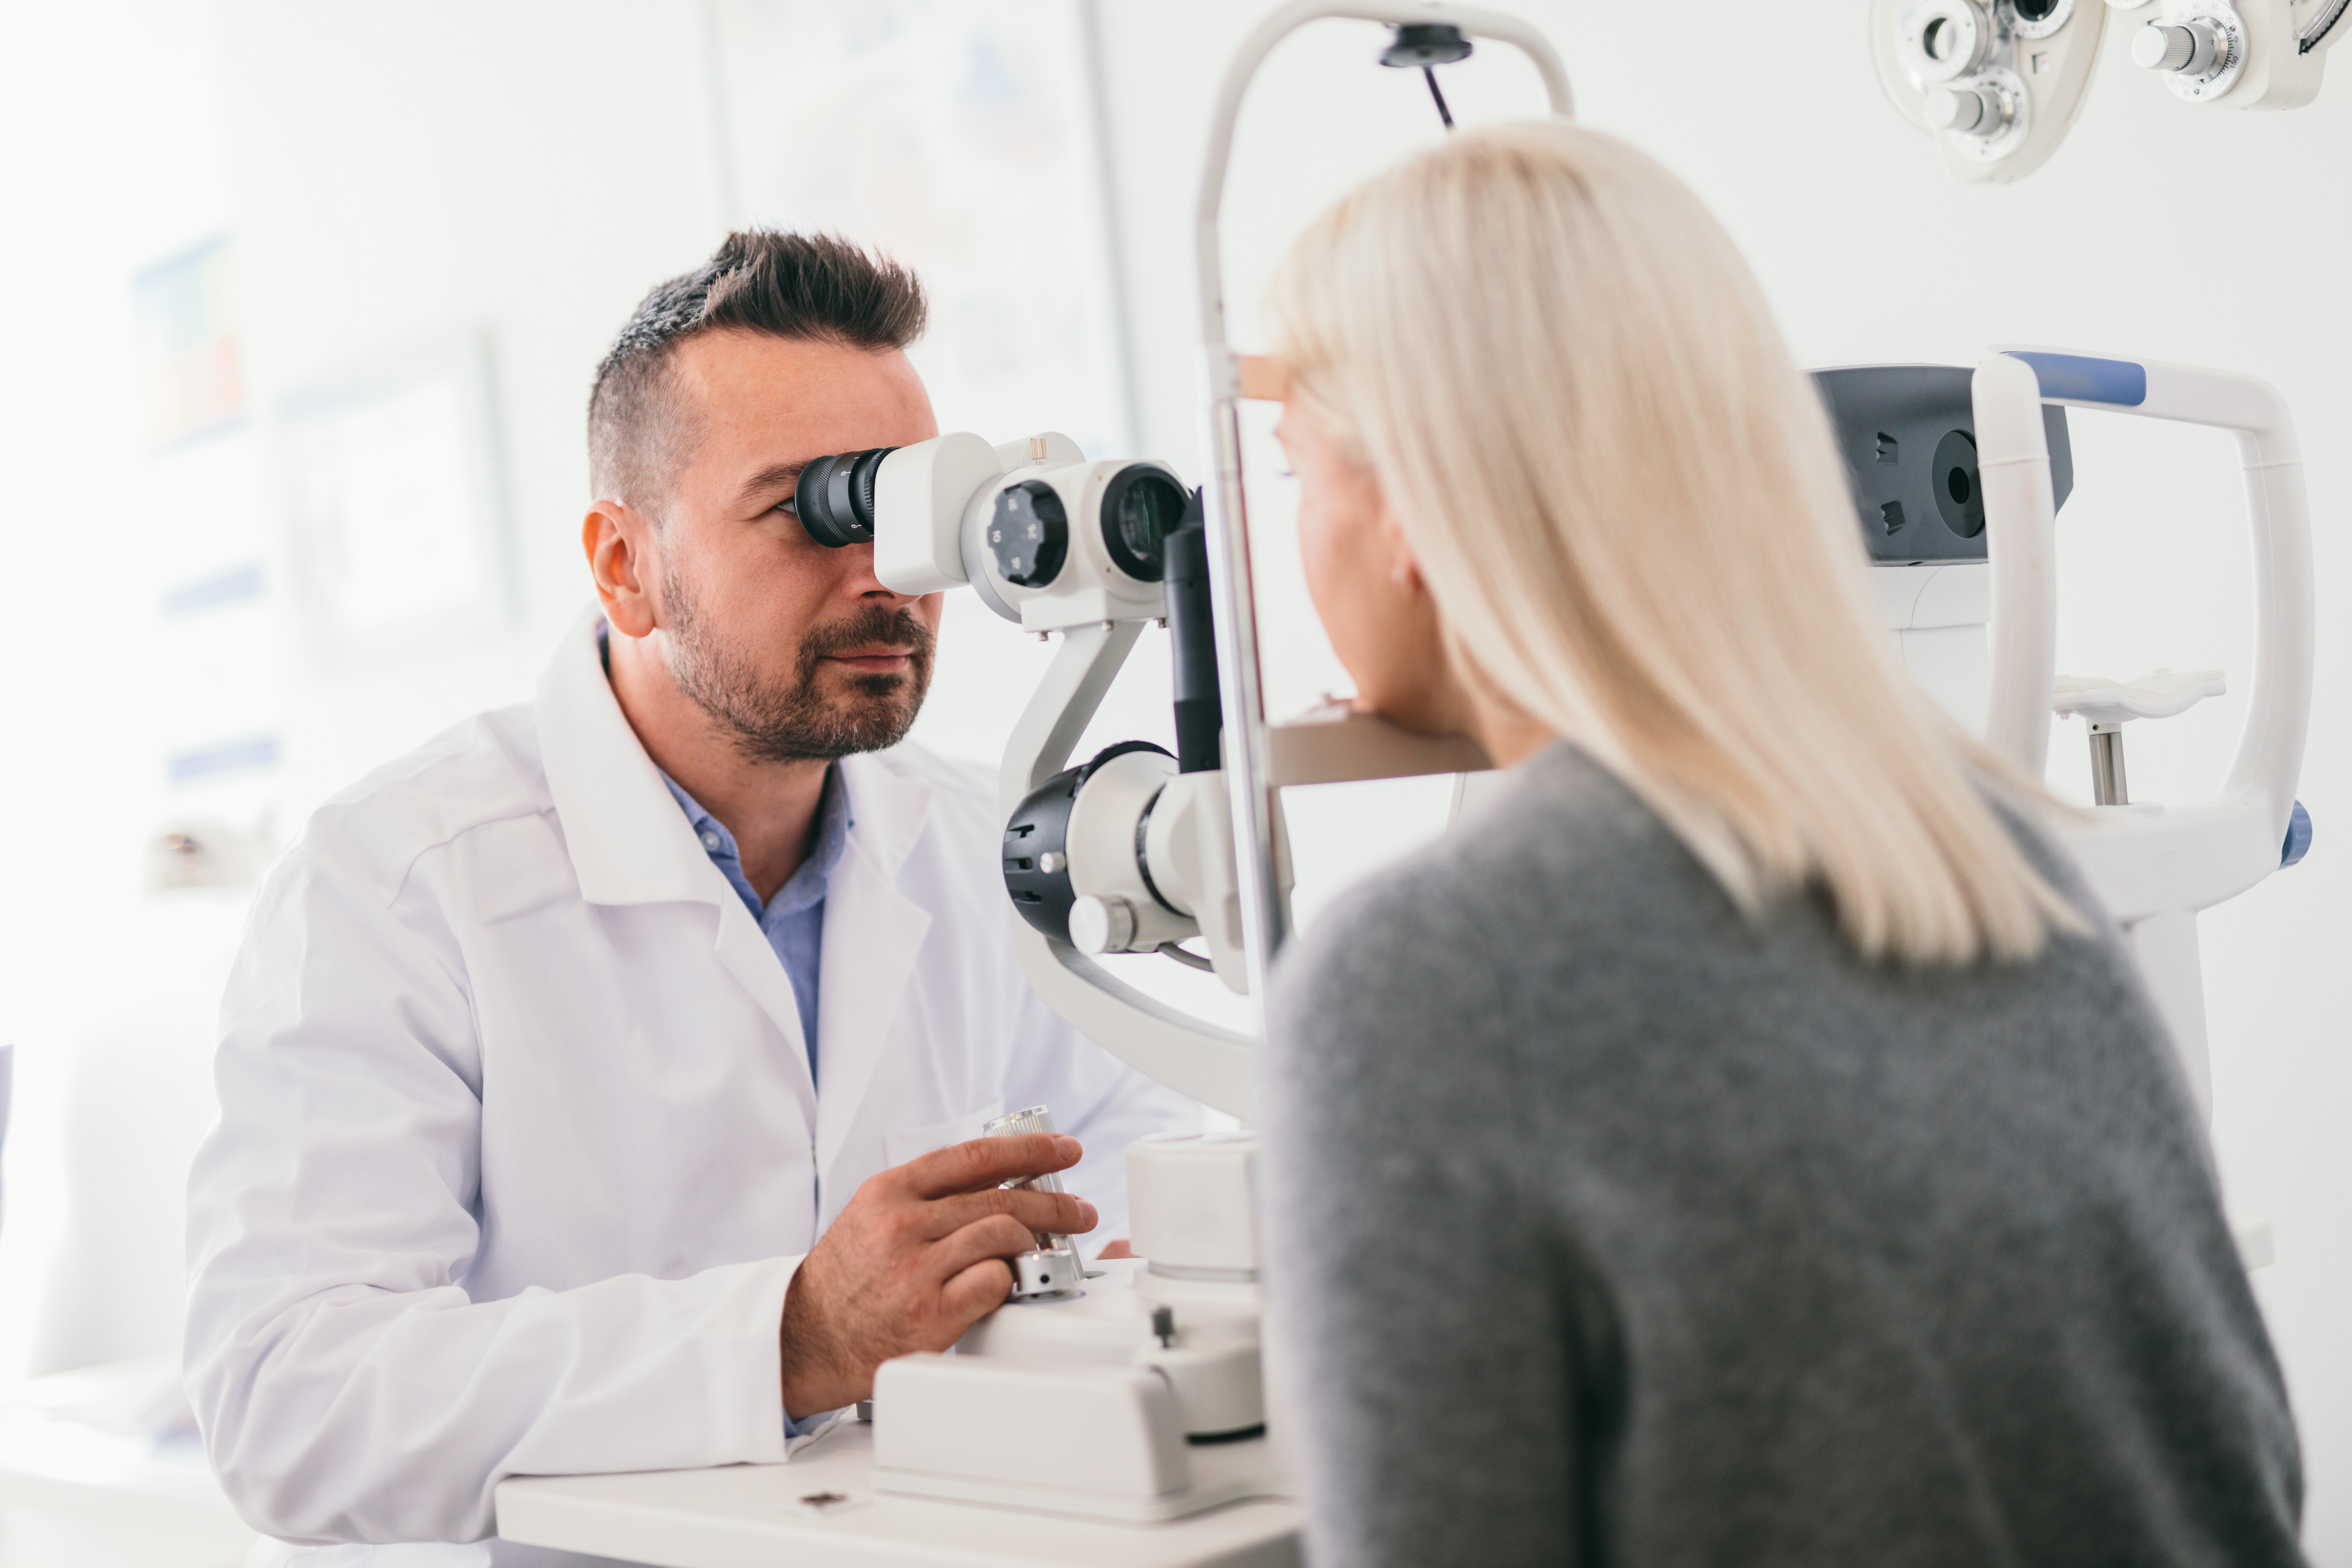 What’s the difference between an optometrist and an ophthalmologist?